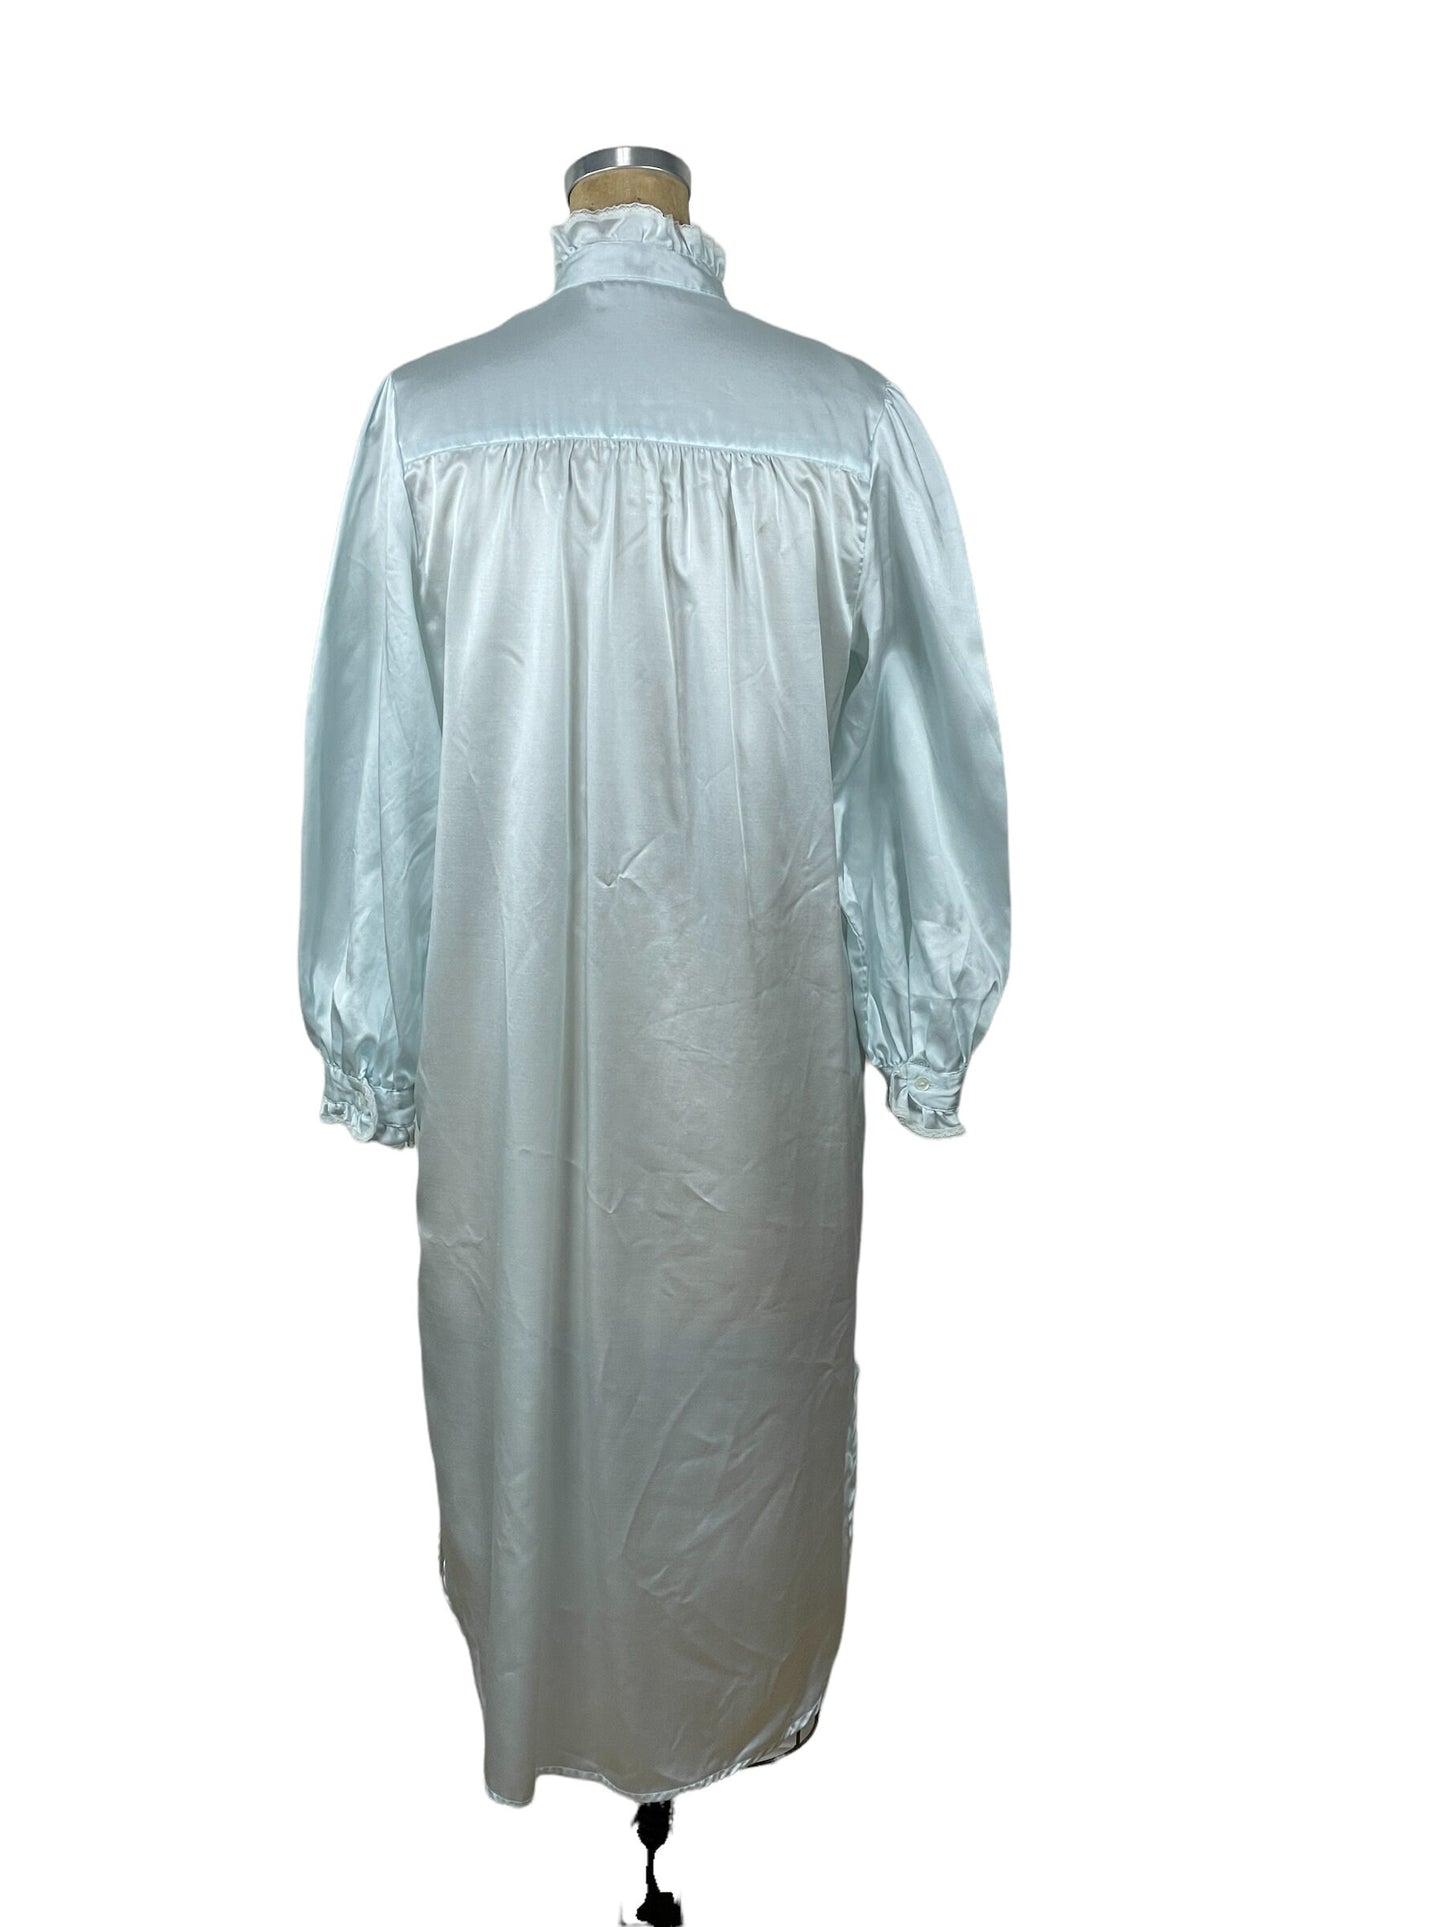 1980s flannel backed blue satin nightgown by Miss Elaine Size M